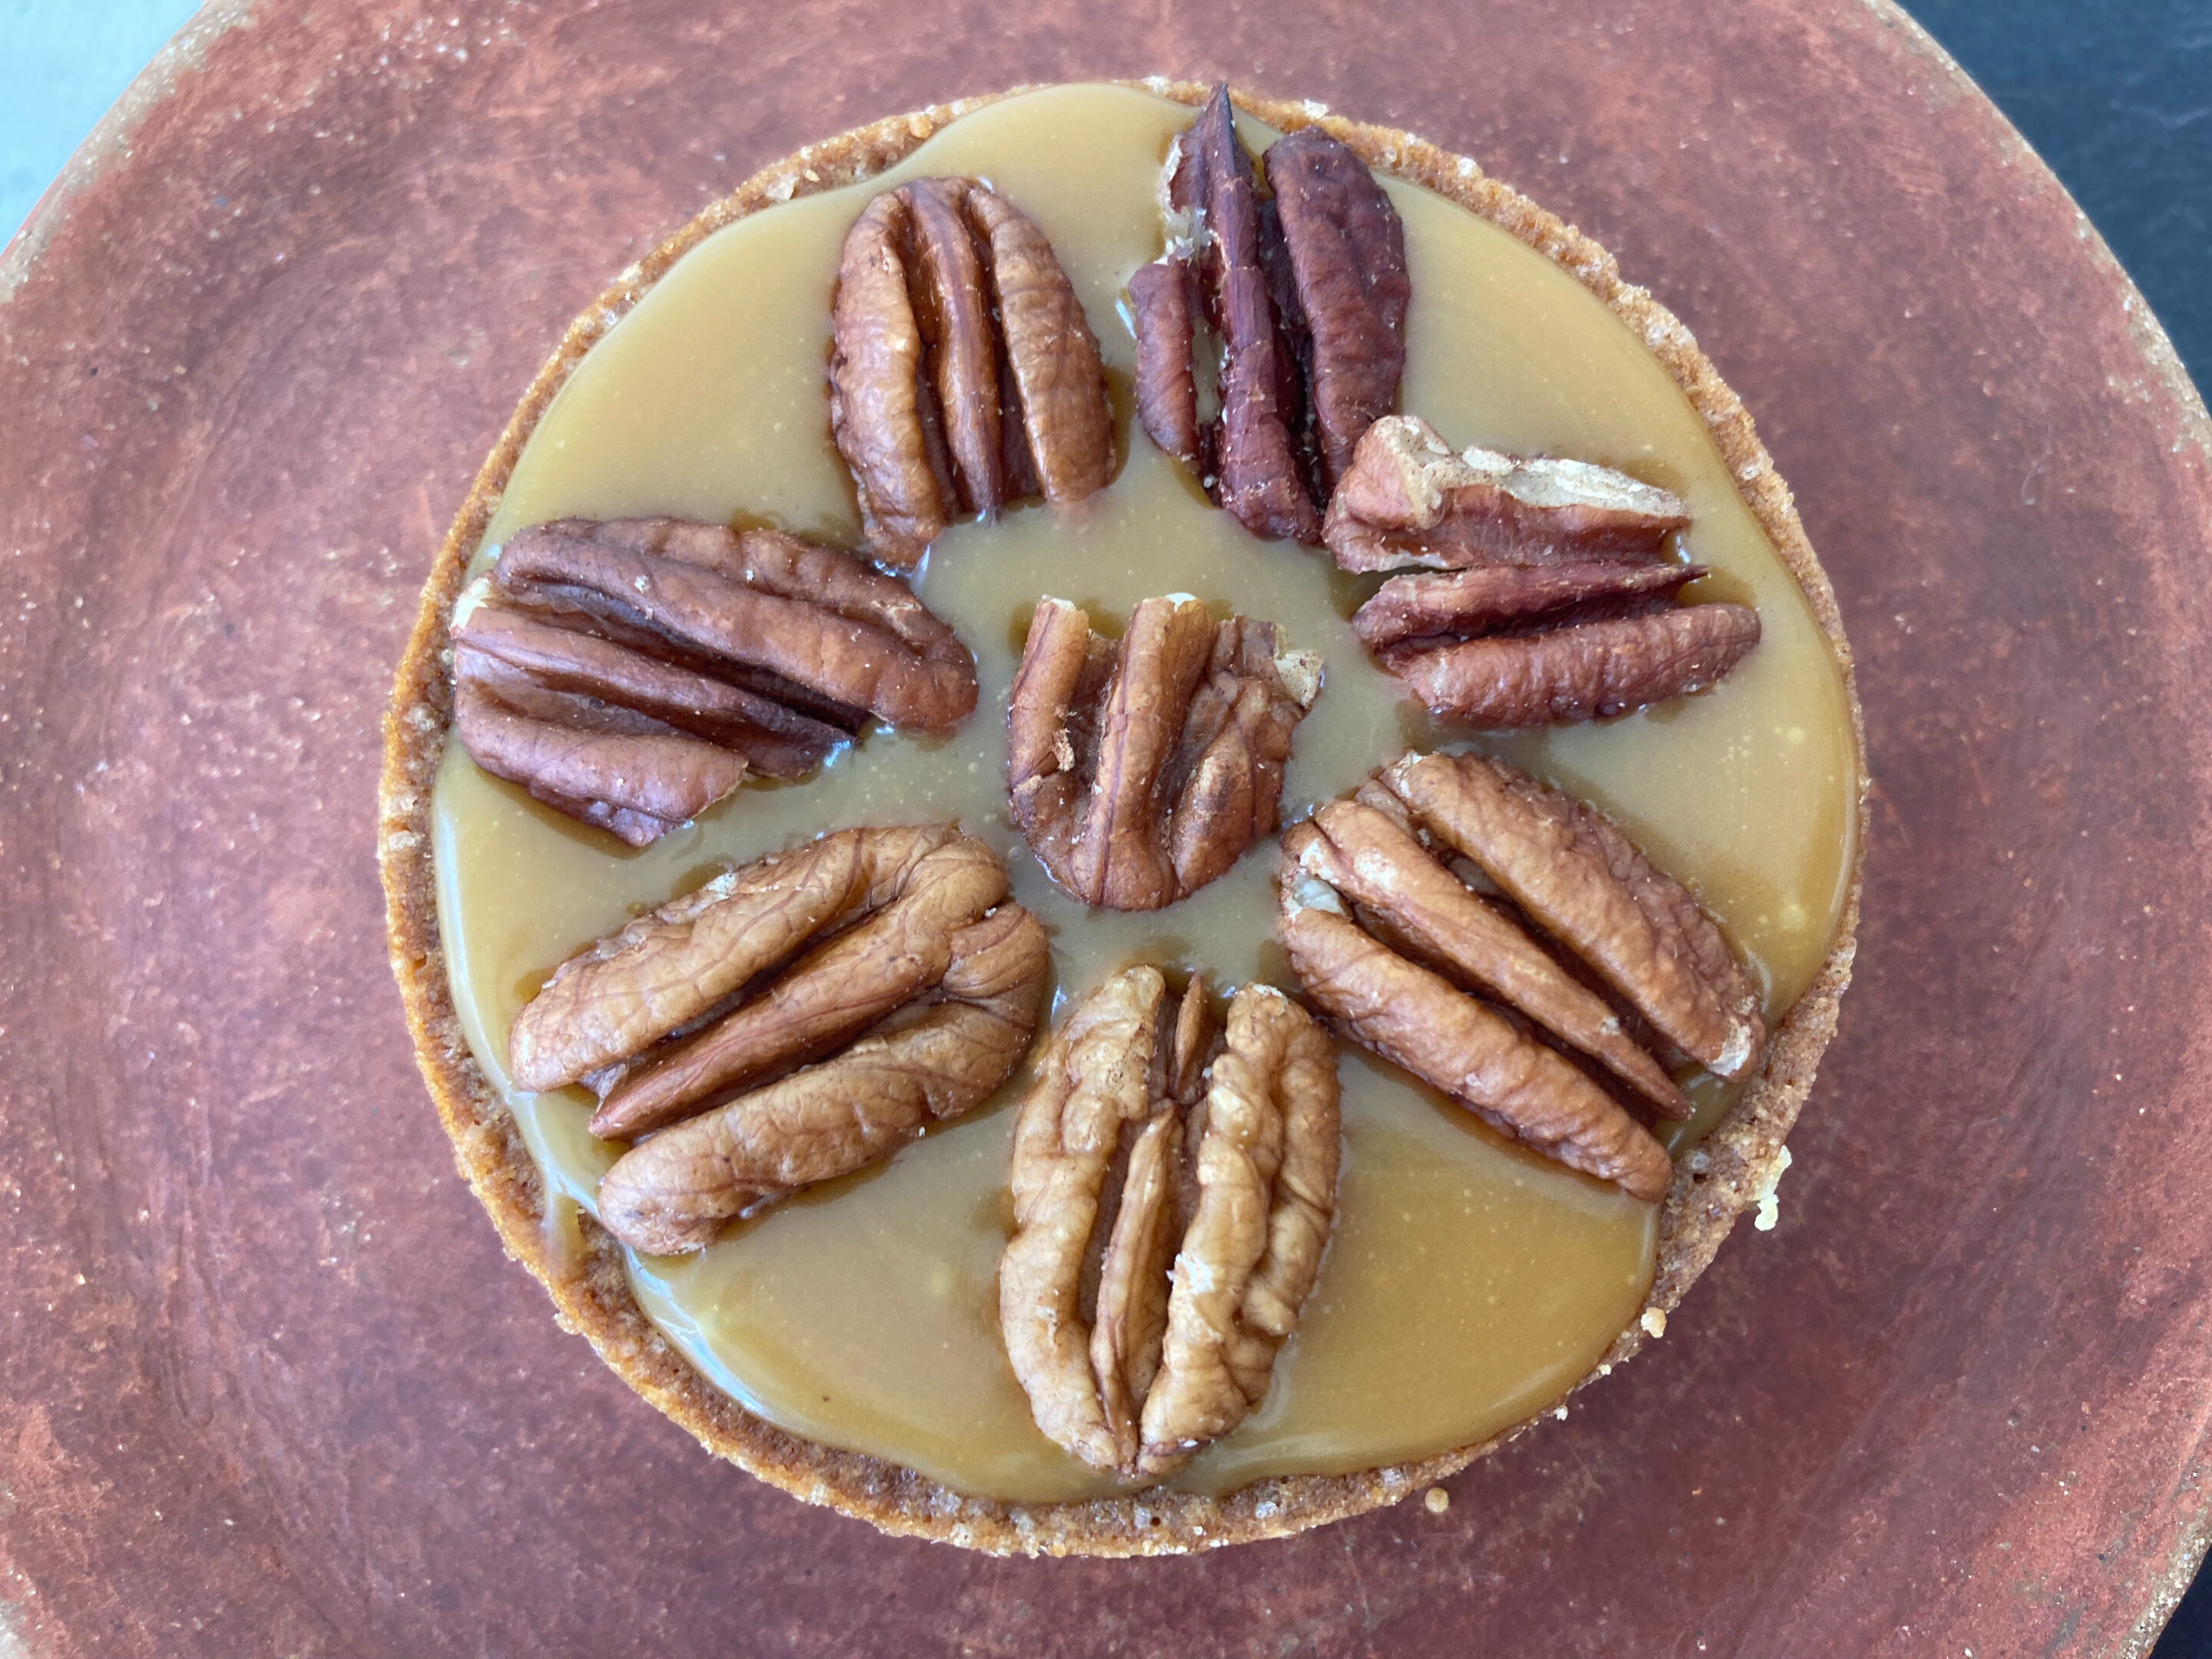 A lovely dessert from Belleville, topped with caramel and pecans, served on a artesanal clay plate.